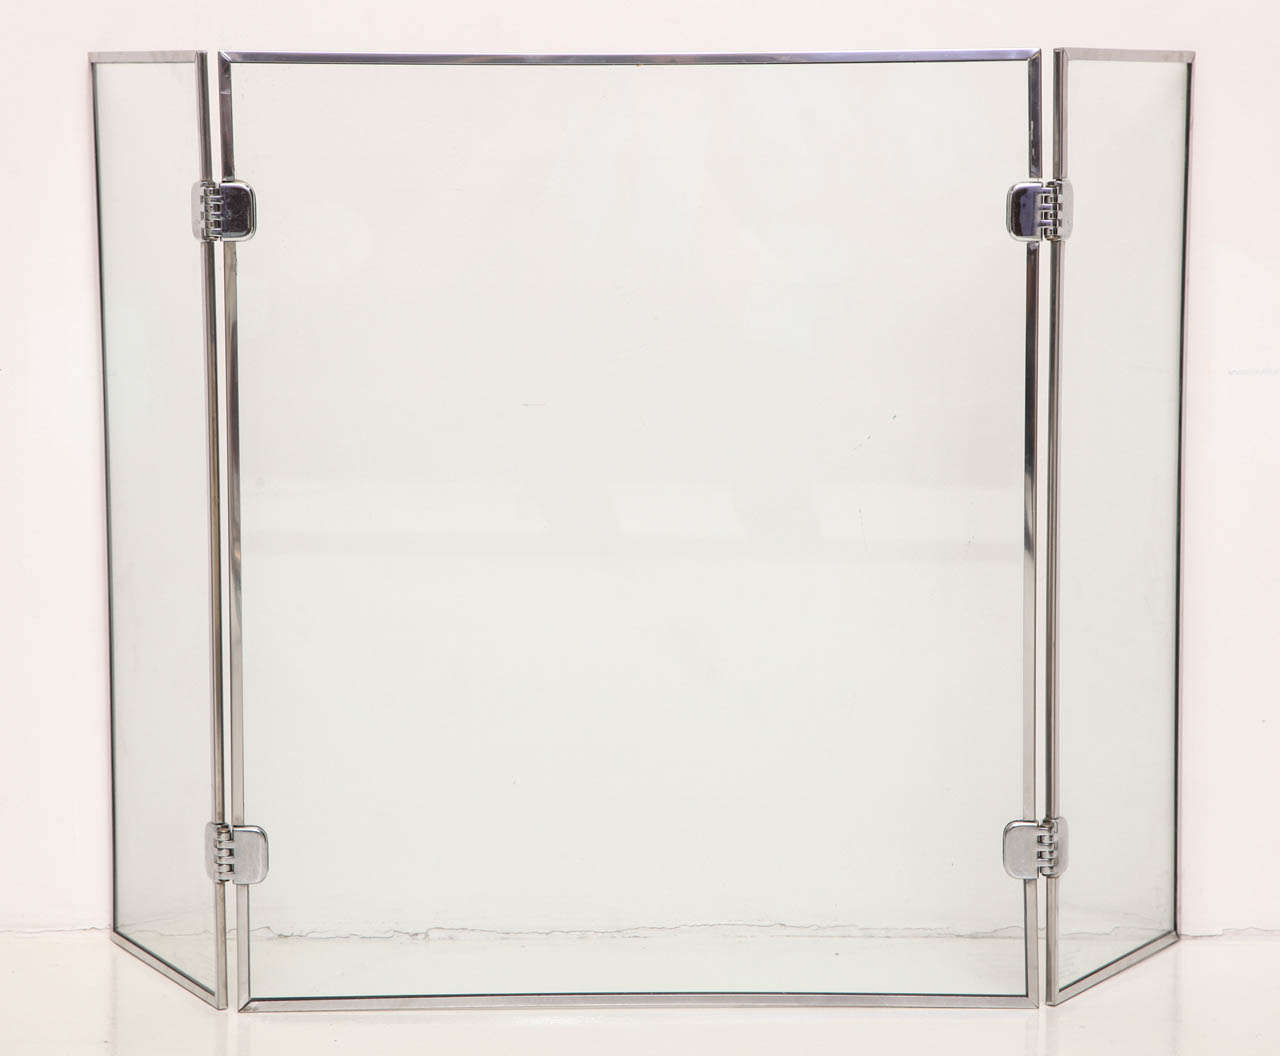 KARL SPRINGER (1930-1991)
Folding screen in tempered glass with chrome frame and hinges
American, c. 1970

Screen: 26.5”H x 45”W (unfolded) x .5”D